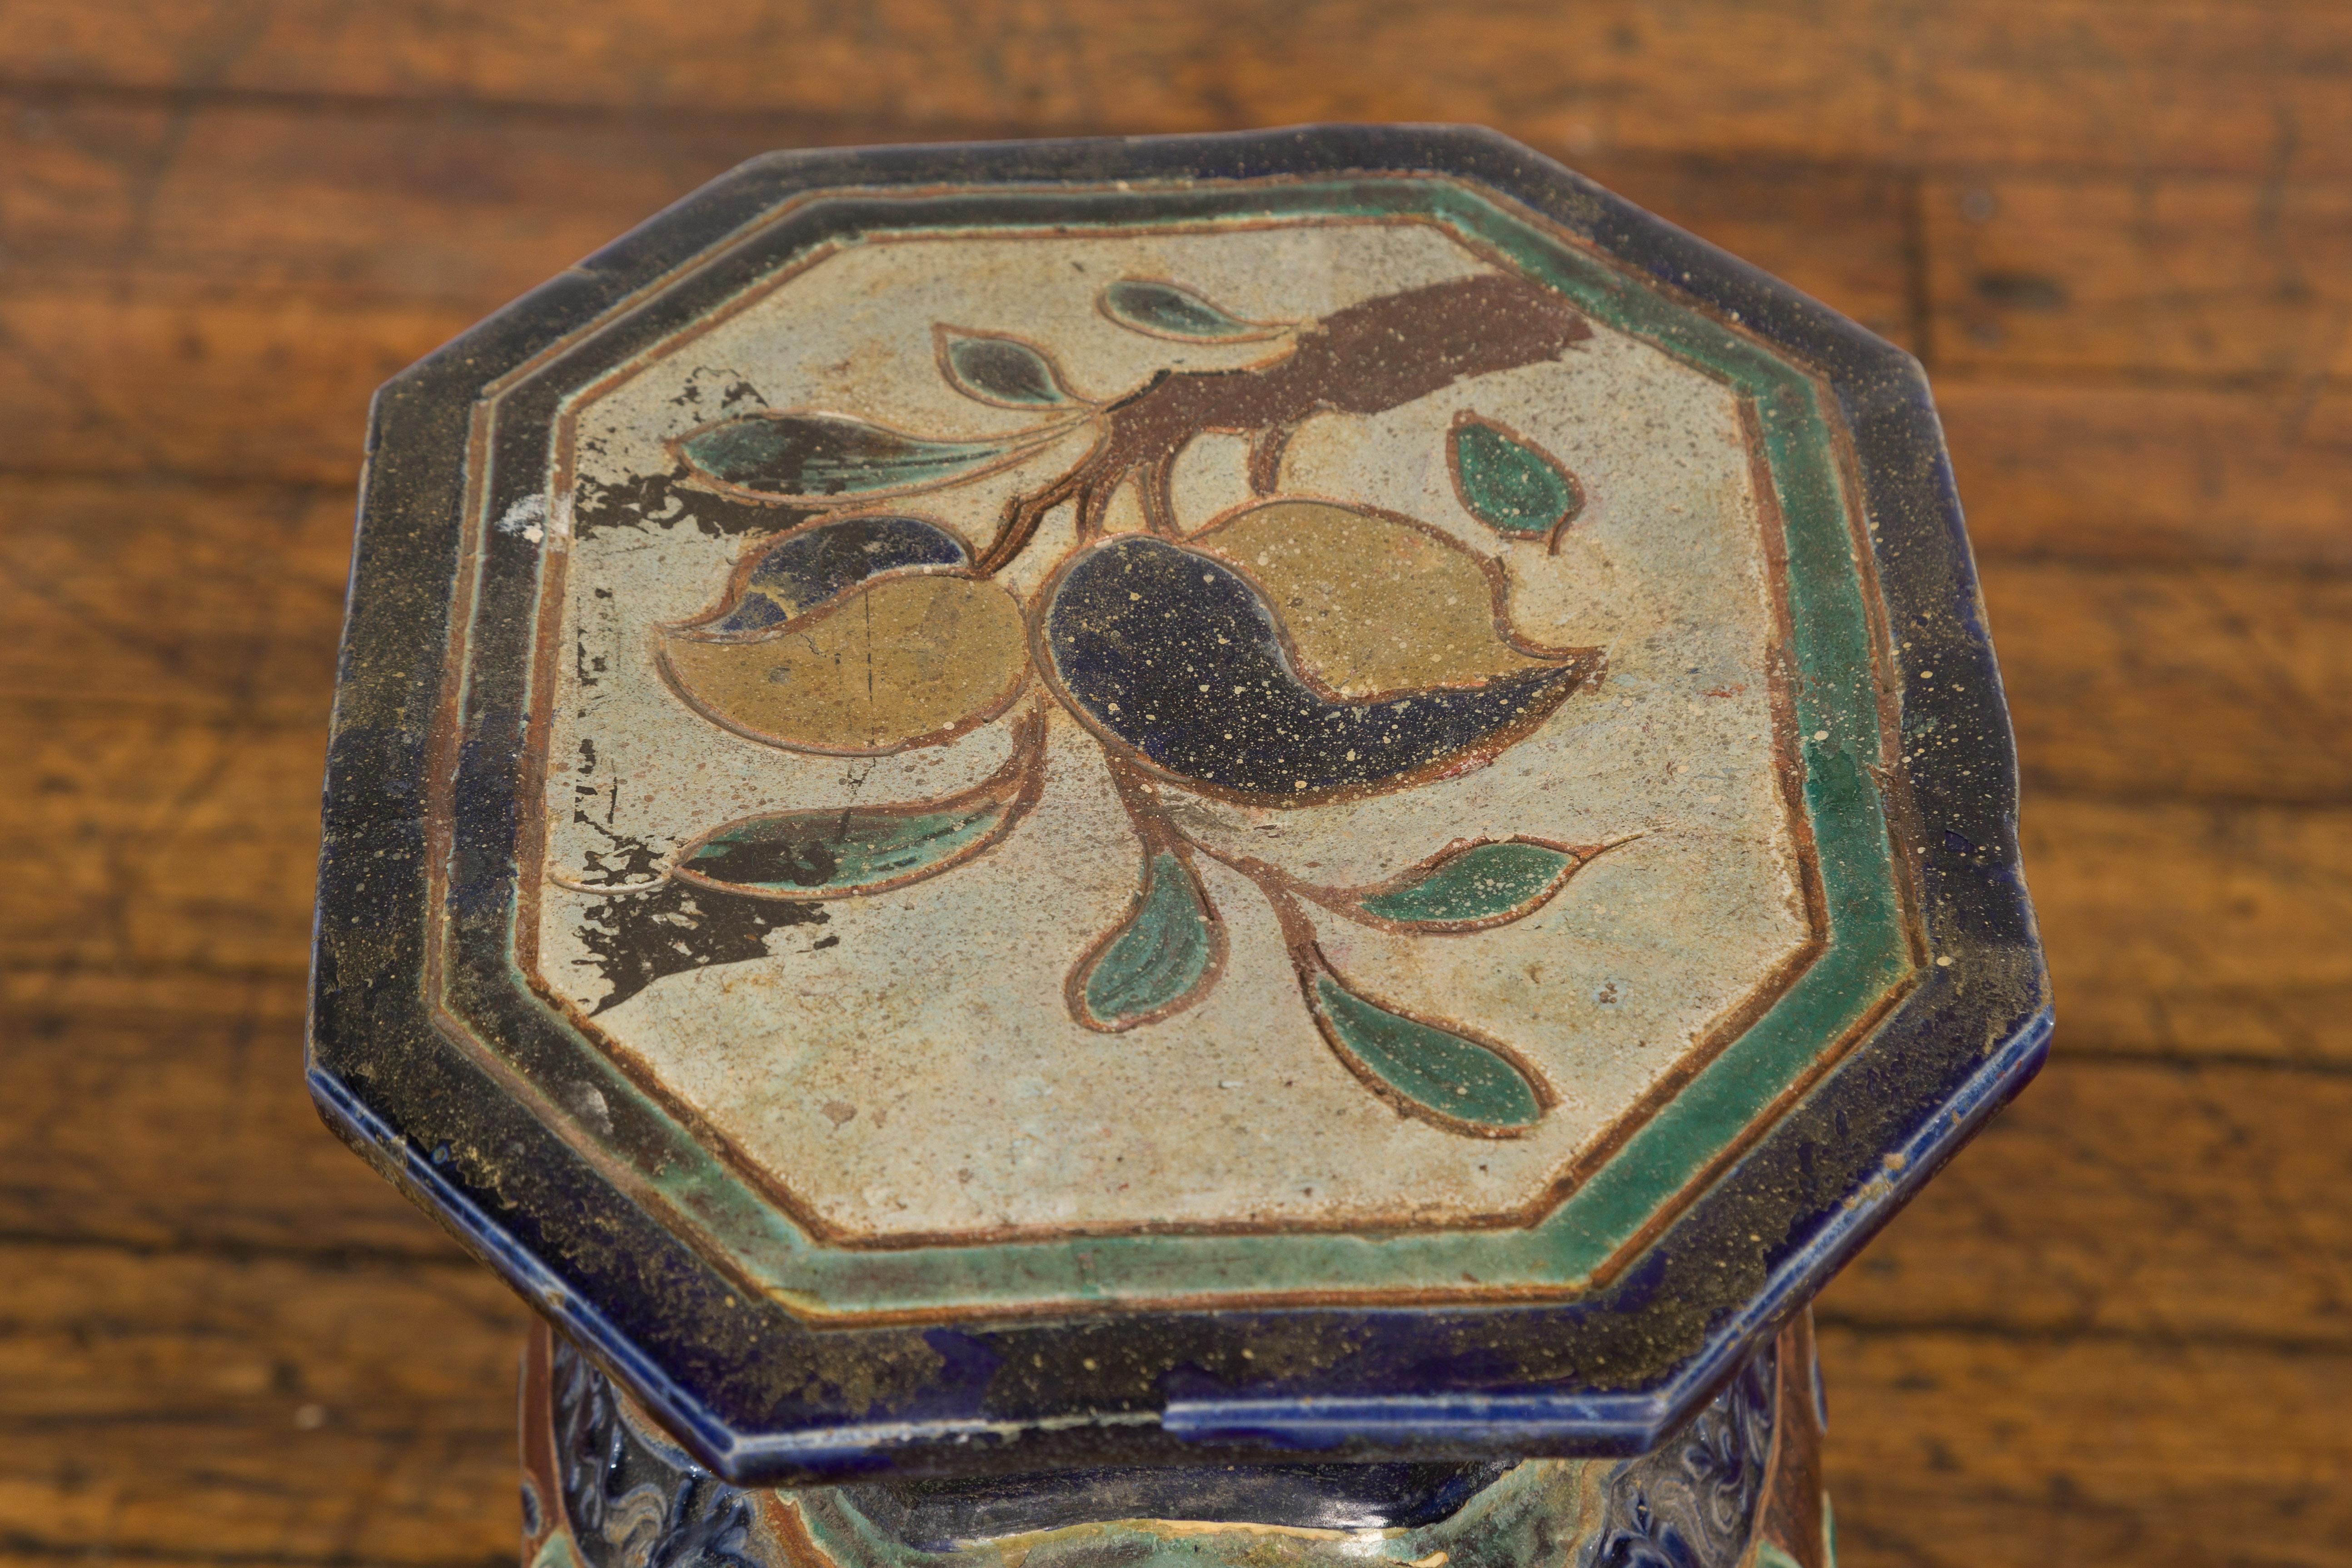 Glazed Antique Hand-Painted Annamese Ceramic Garden Stool from Vietnam, circa 1900 For Sale